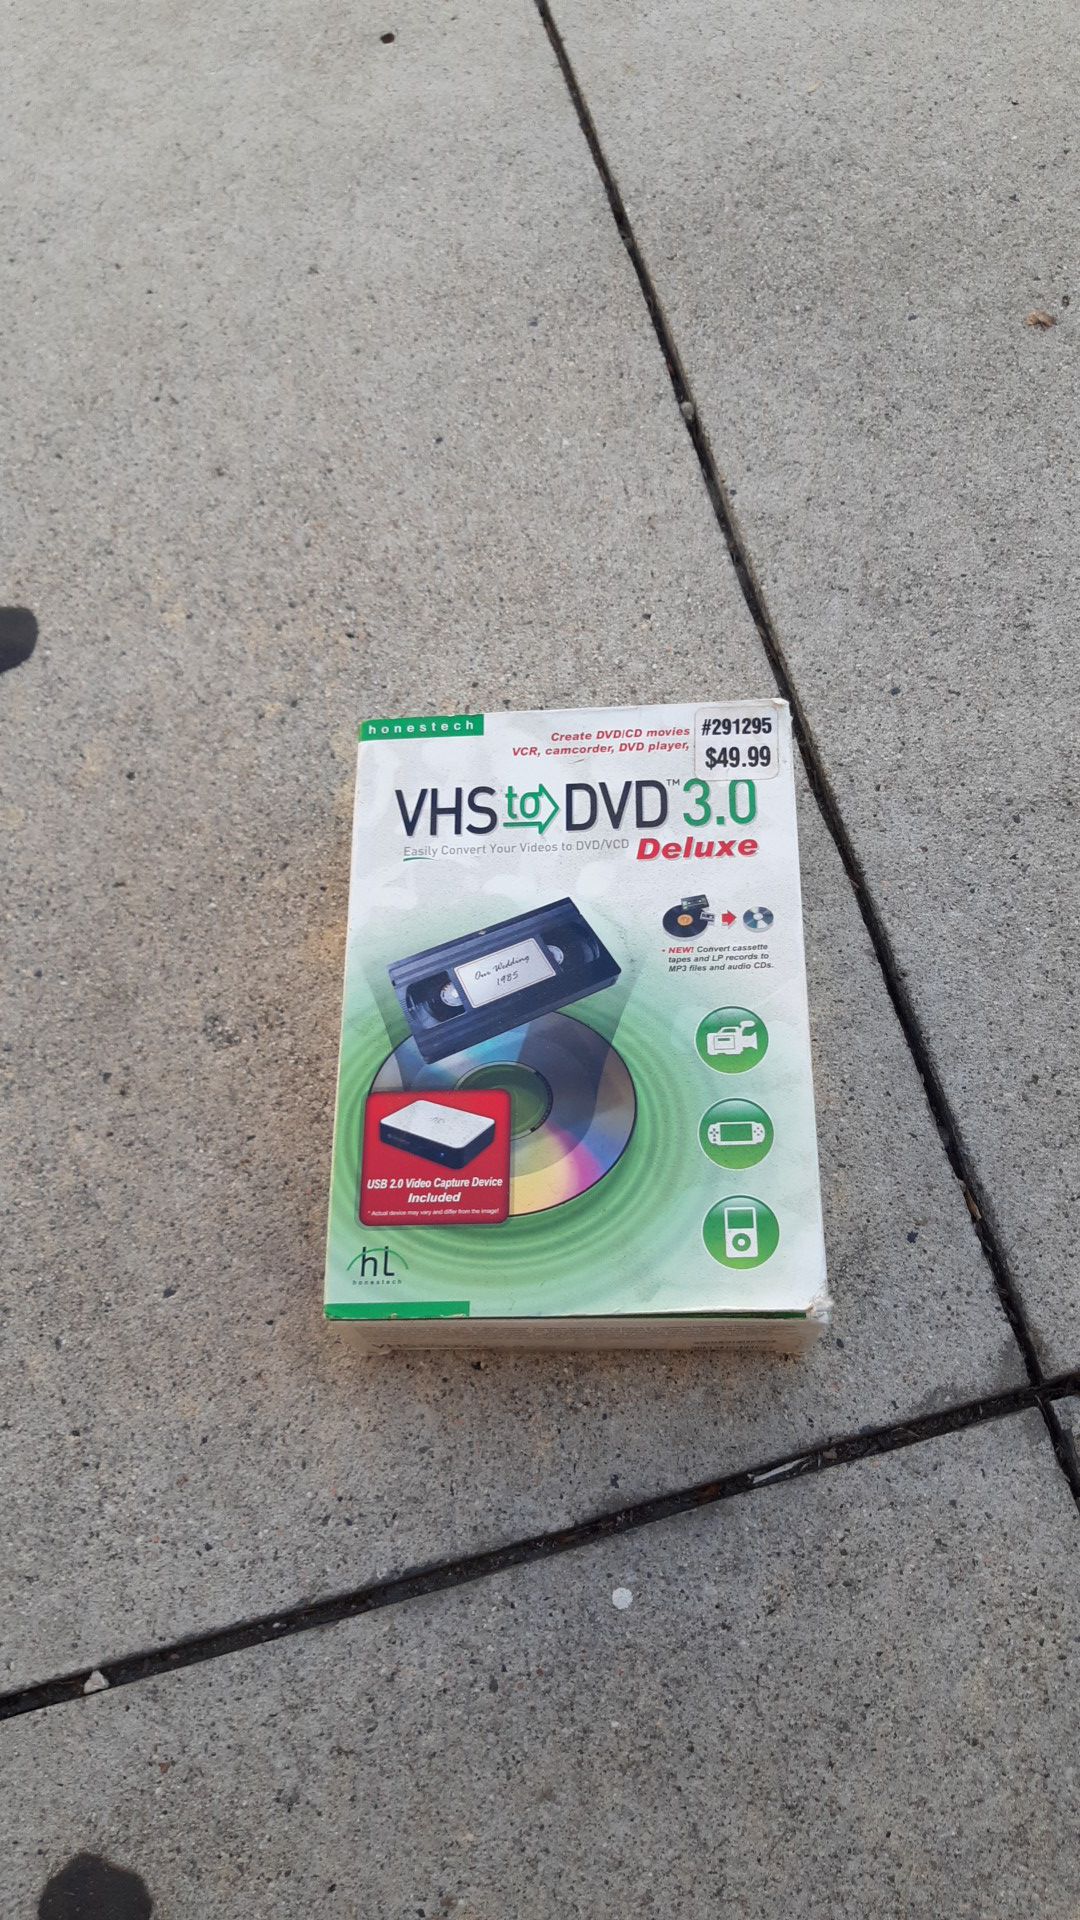 VHS to DVD 3.0 deluxe